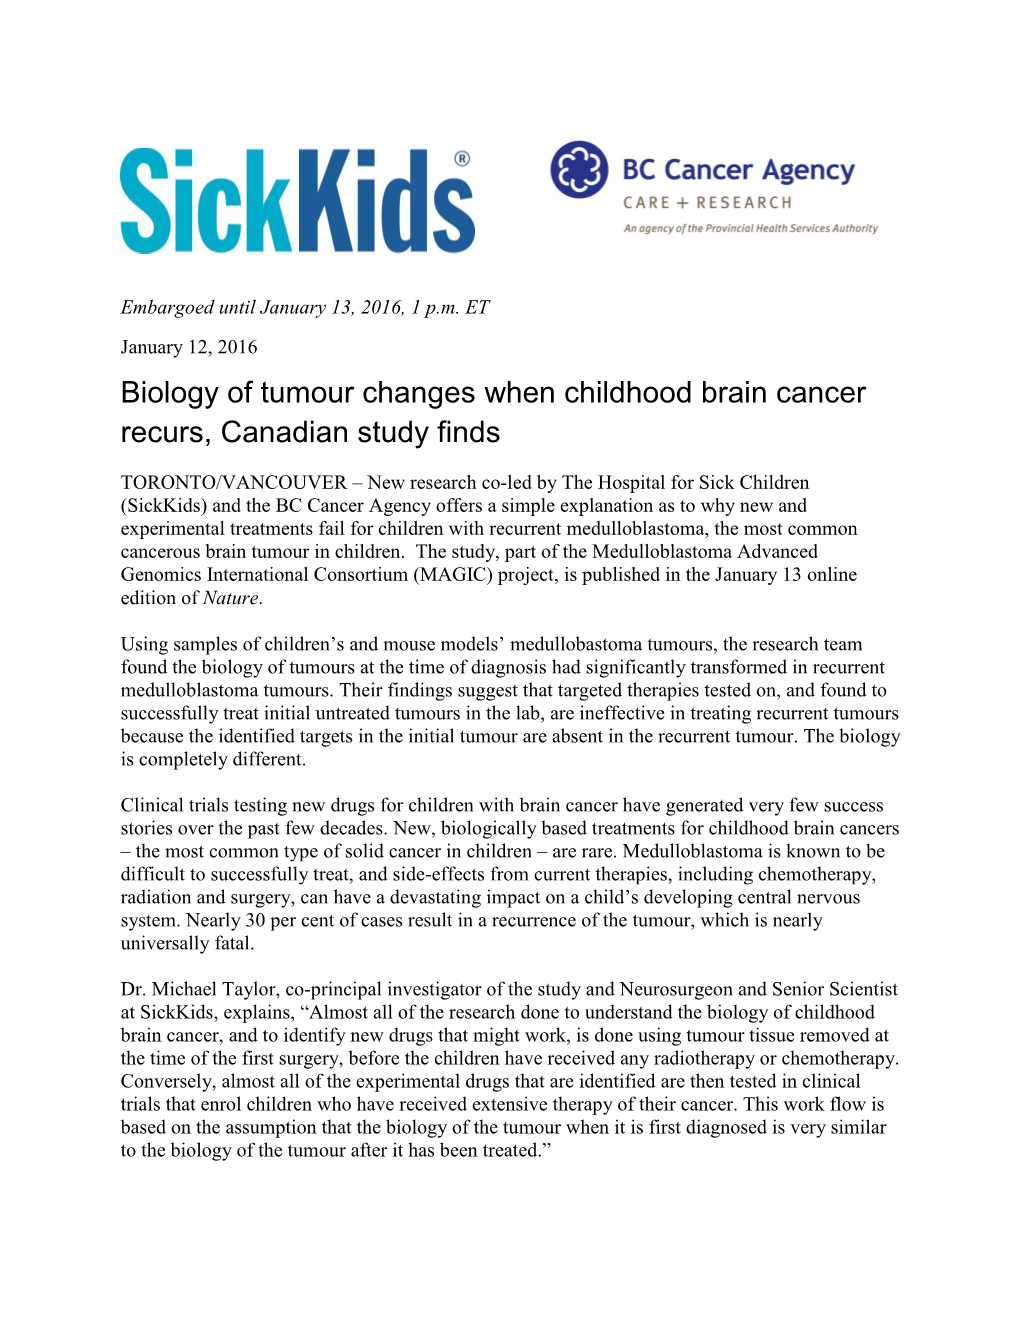 Biology of Tumour Changes When Childhood Brain Cancer Recurs, Canadian Study Finds